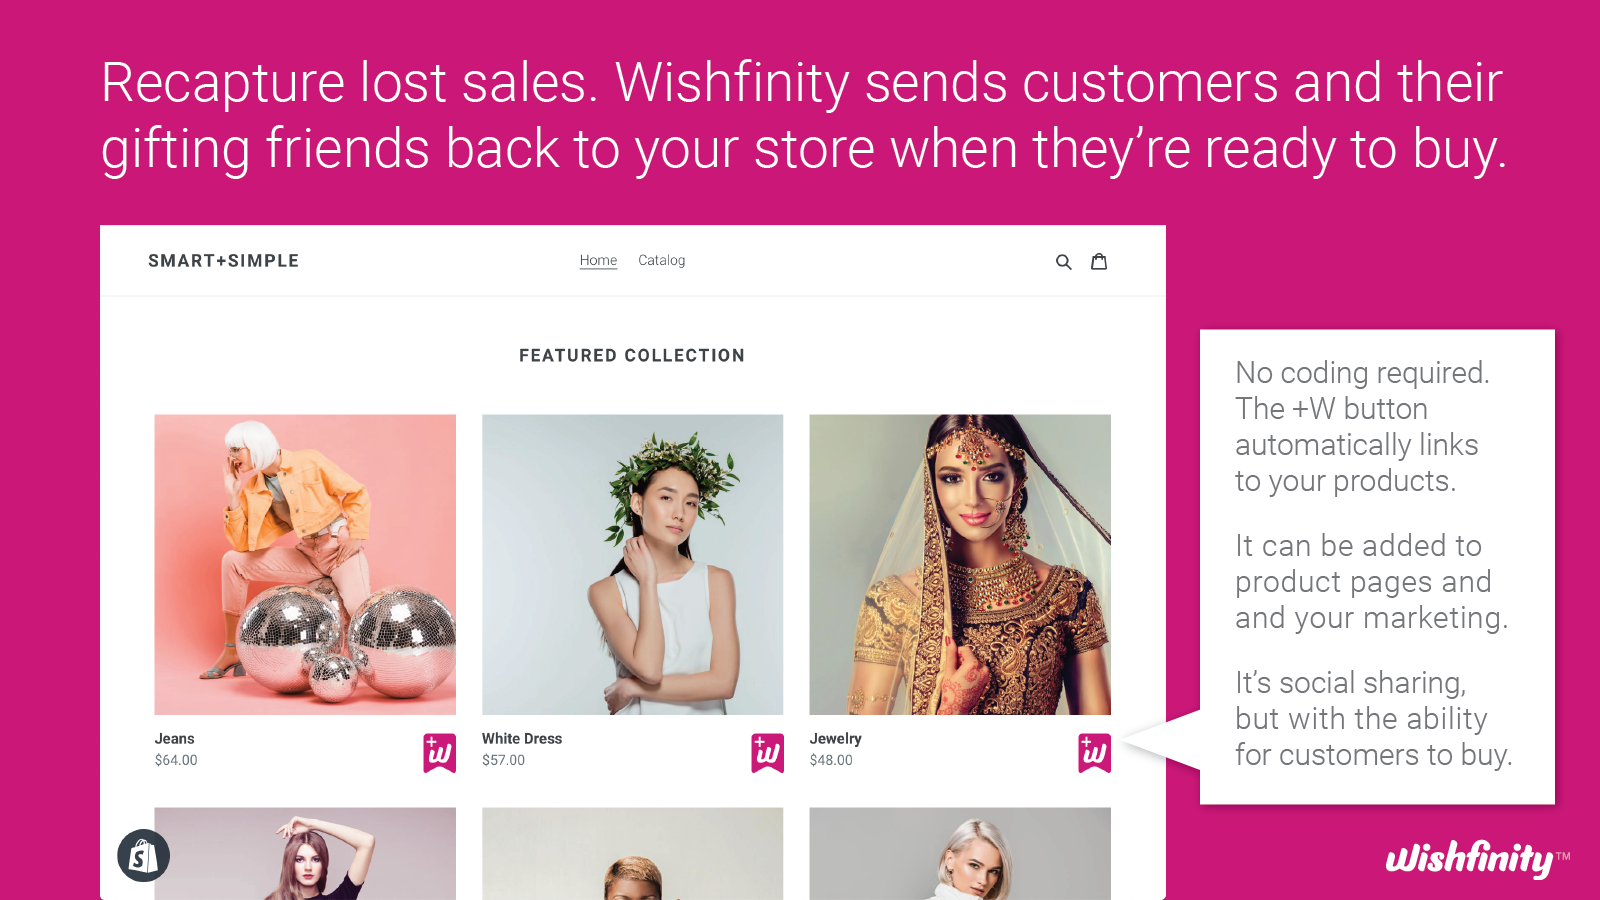 Wishfinity Helps You Sell to Gift-Givers and More Consumers